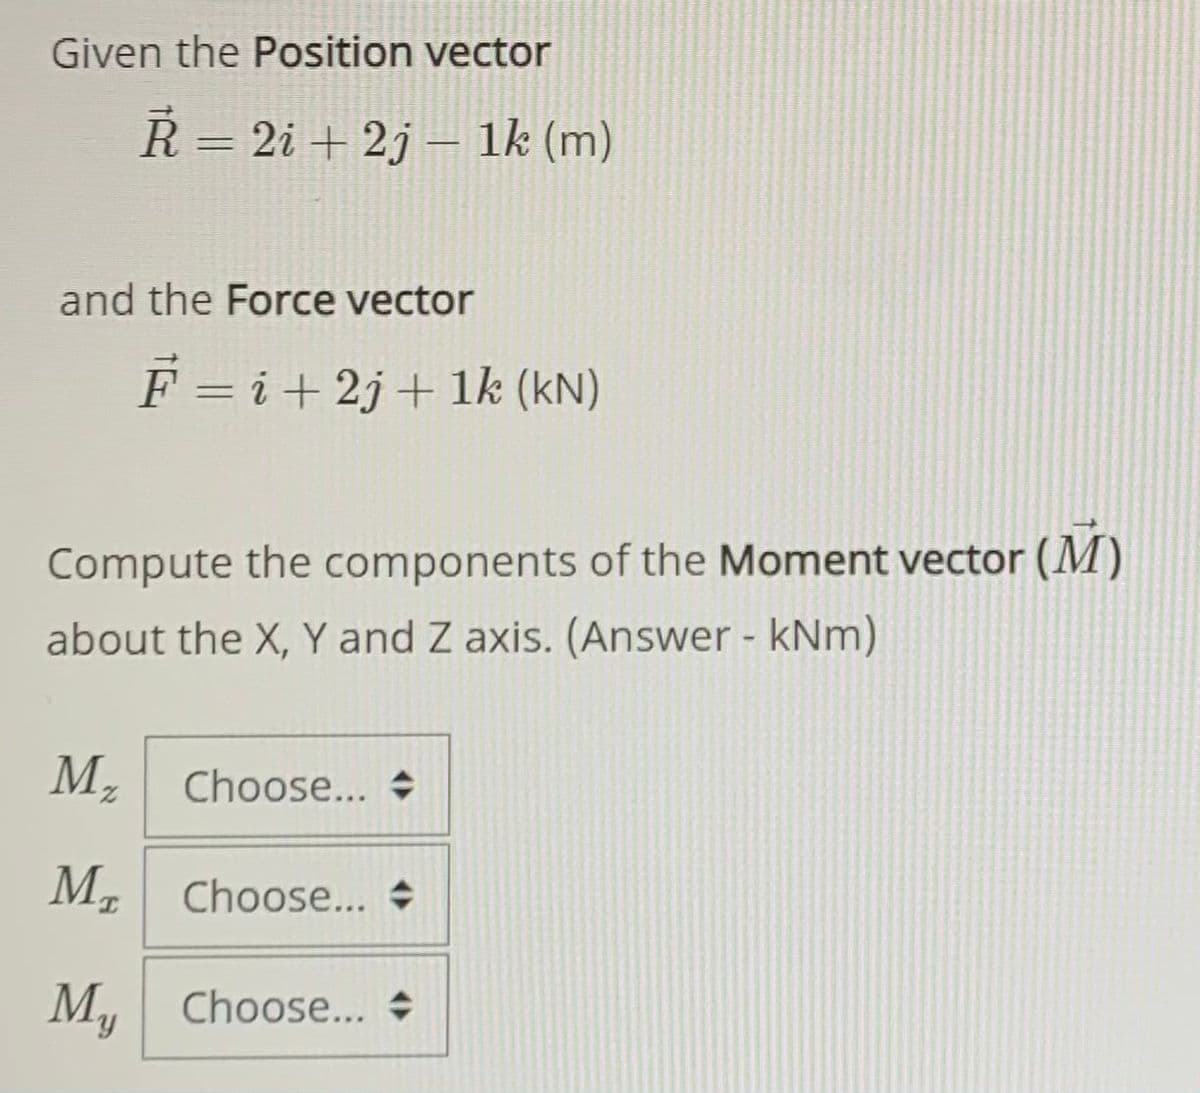 Given the Position vector
R = 2i + 2j – 1k (m)
%3D
and the Force vector
F = i+ 2j+ 1k (kN)
Compute the components of the Moment vector (M)
about the X, Y and Z axis. (Answer - kNm)
М,
Choose...
2.
M, Choose... +
My
Choose... +
